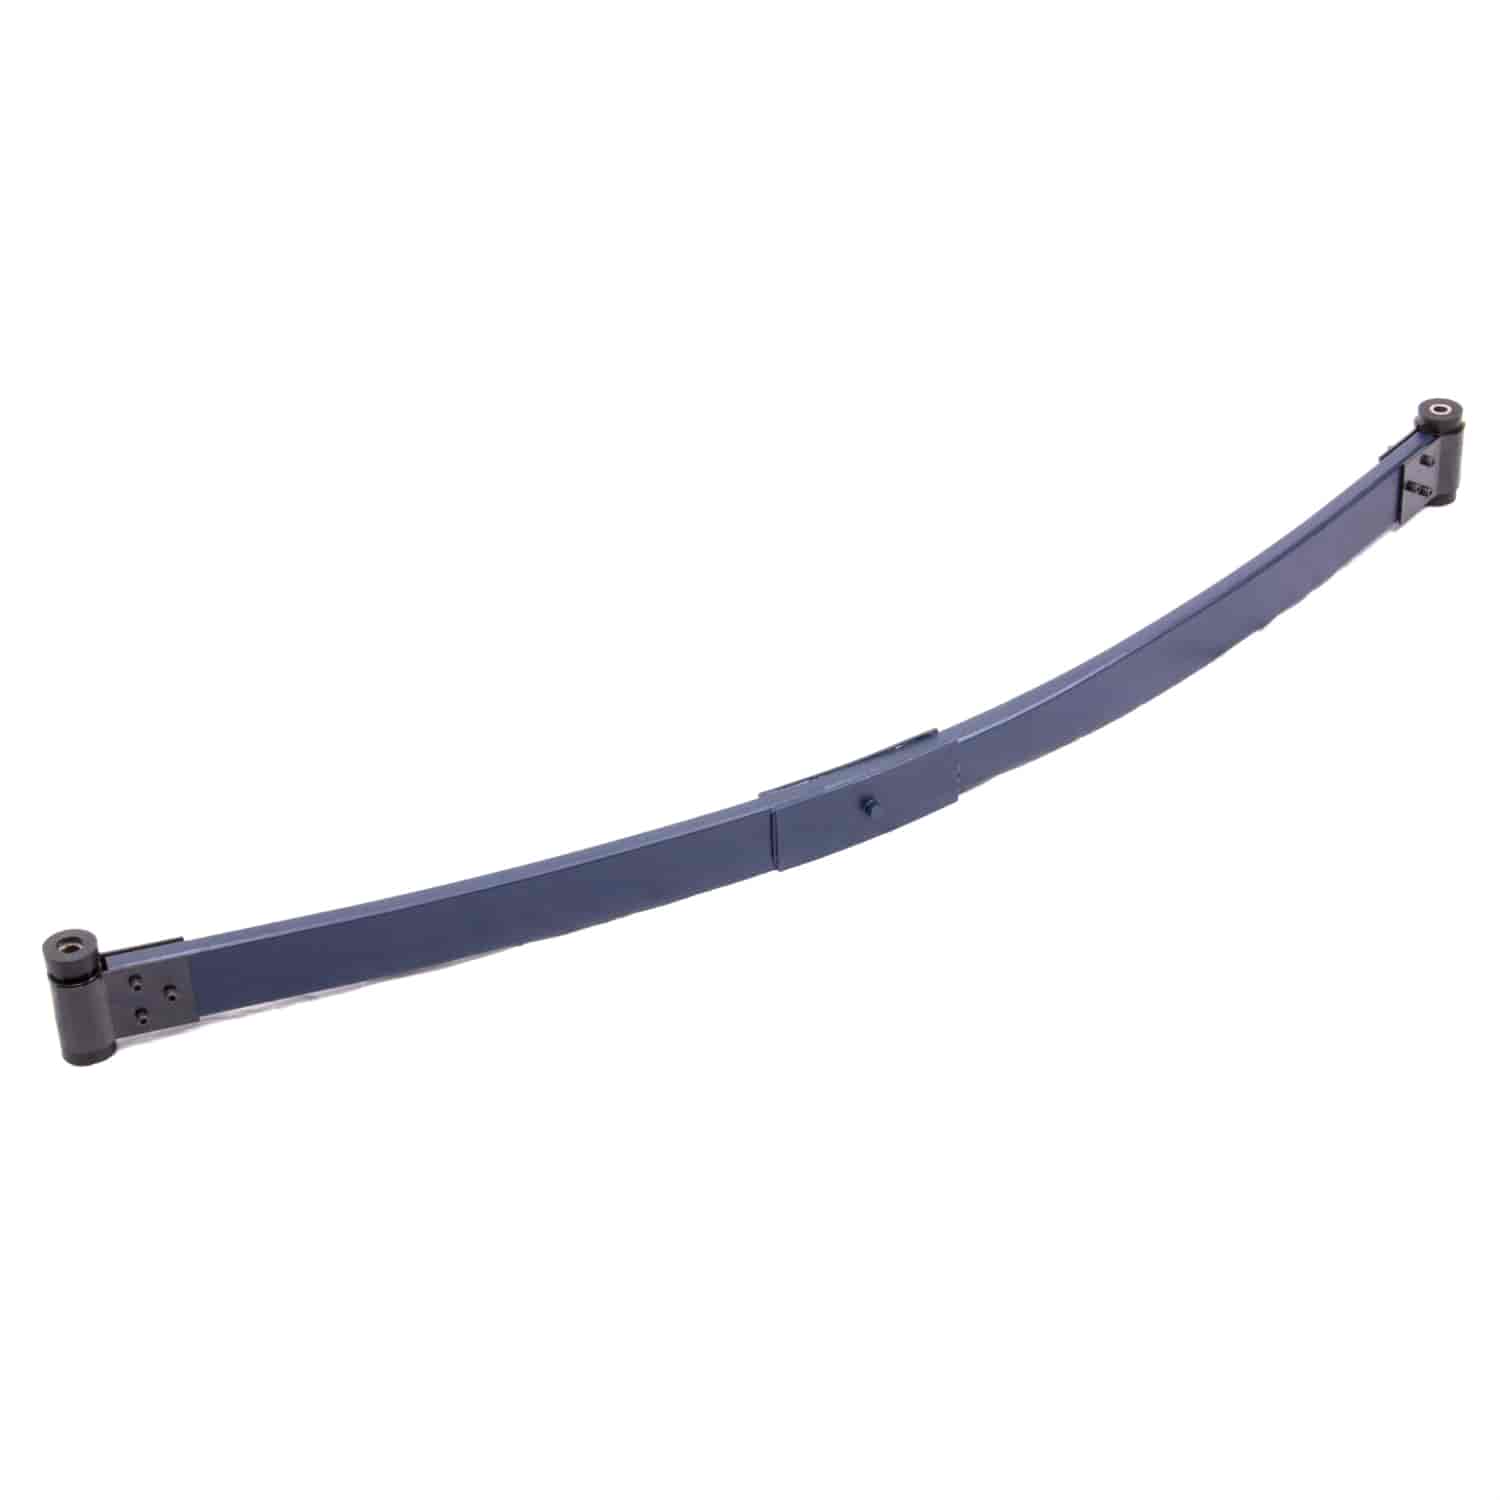 Composite Leaf Spring GM Style - 250 lbs.